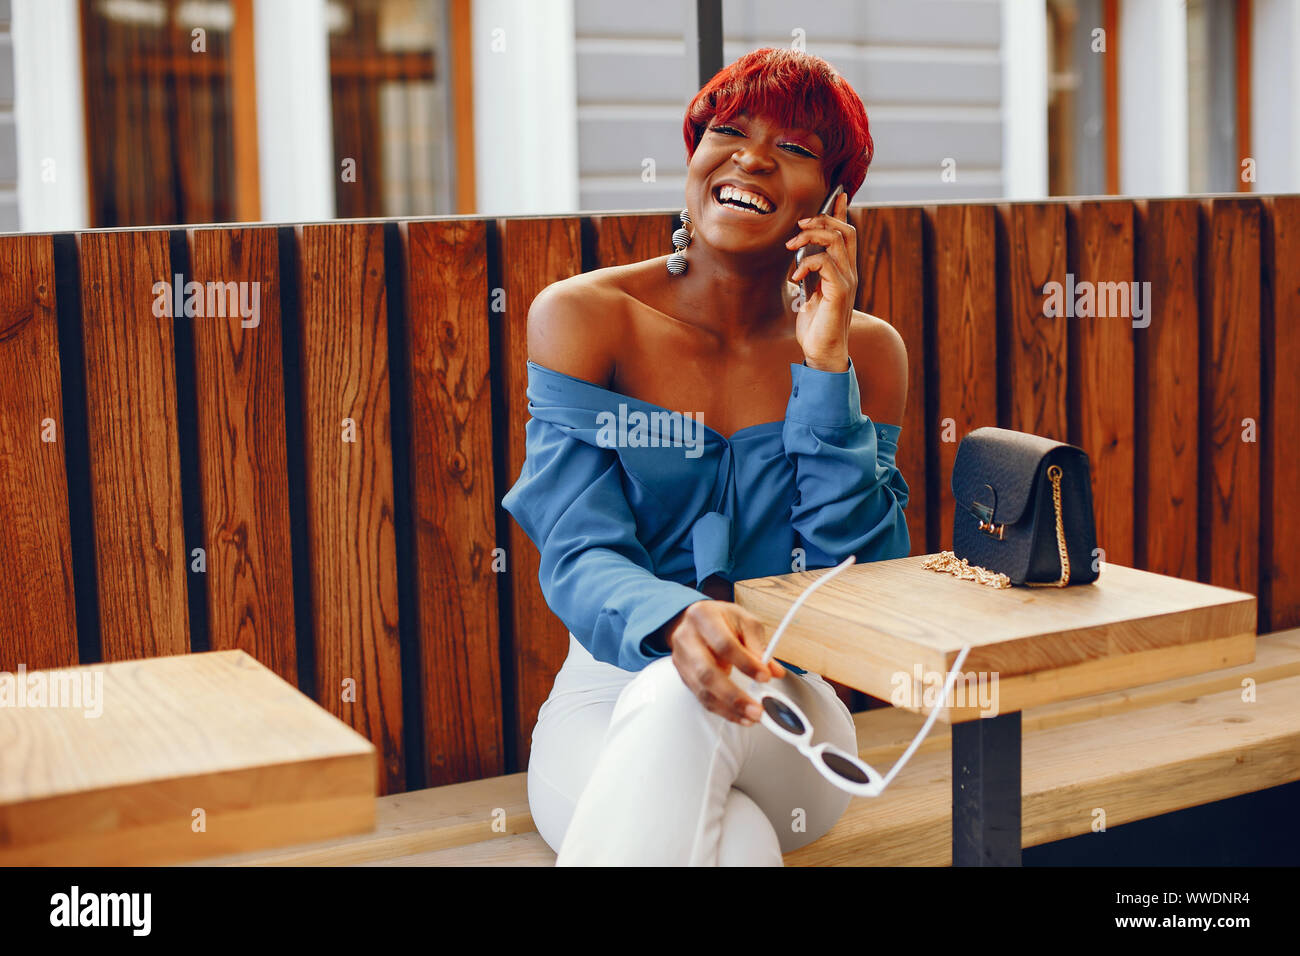 Beautiful And Stylish Dark Skinned Girl With Red Short Hair